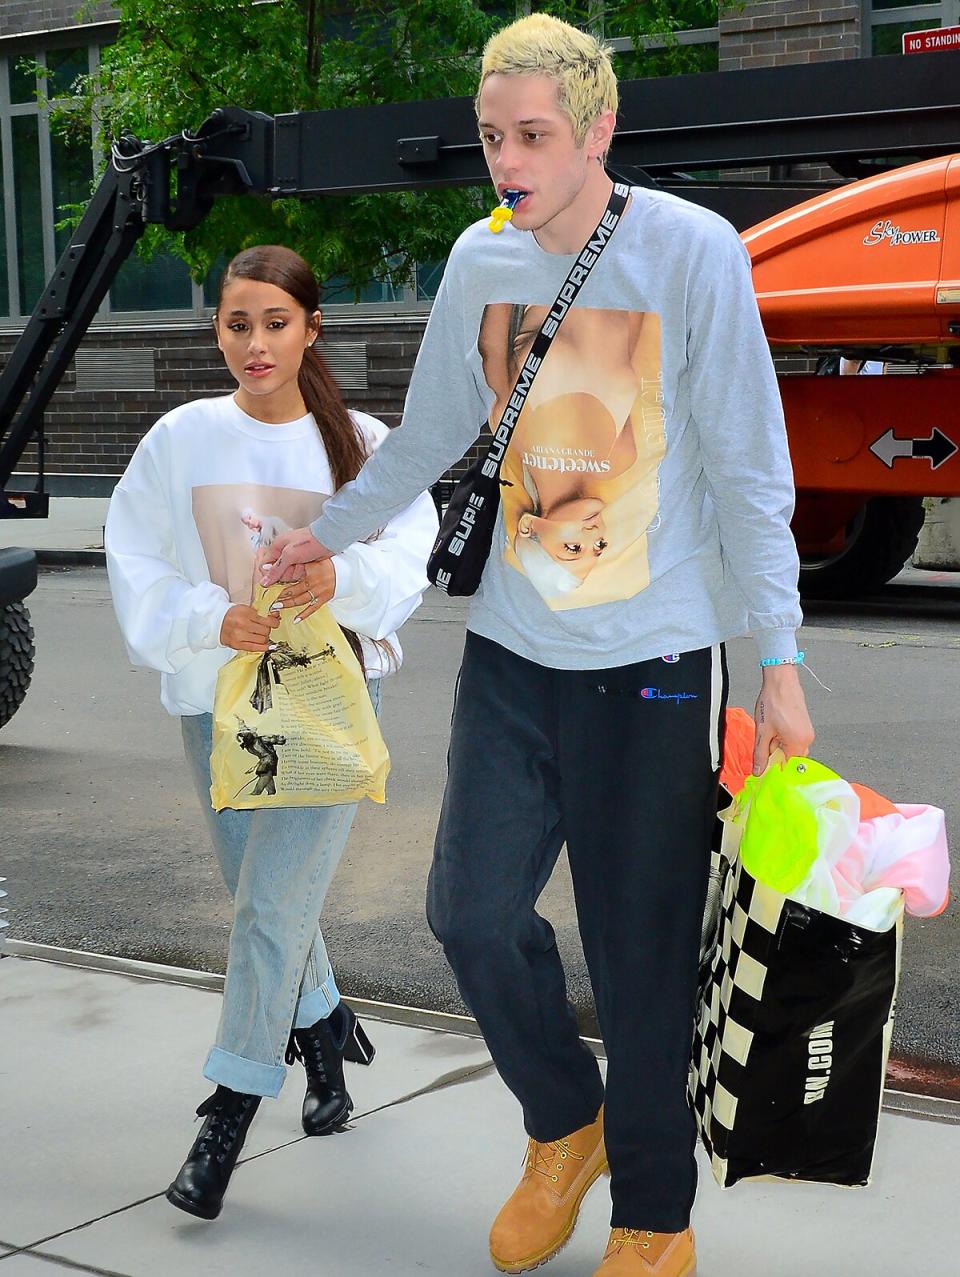 EXCLUSIVE: Ariana Grande and Pete Davidson go to Barnes and Noble for books together in New York